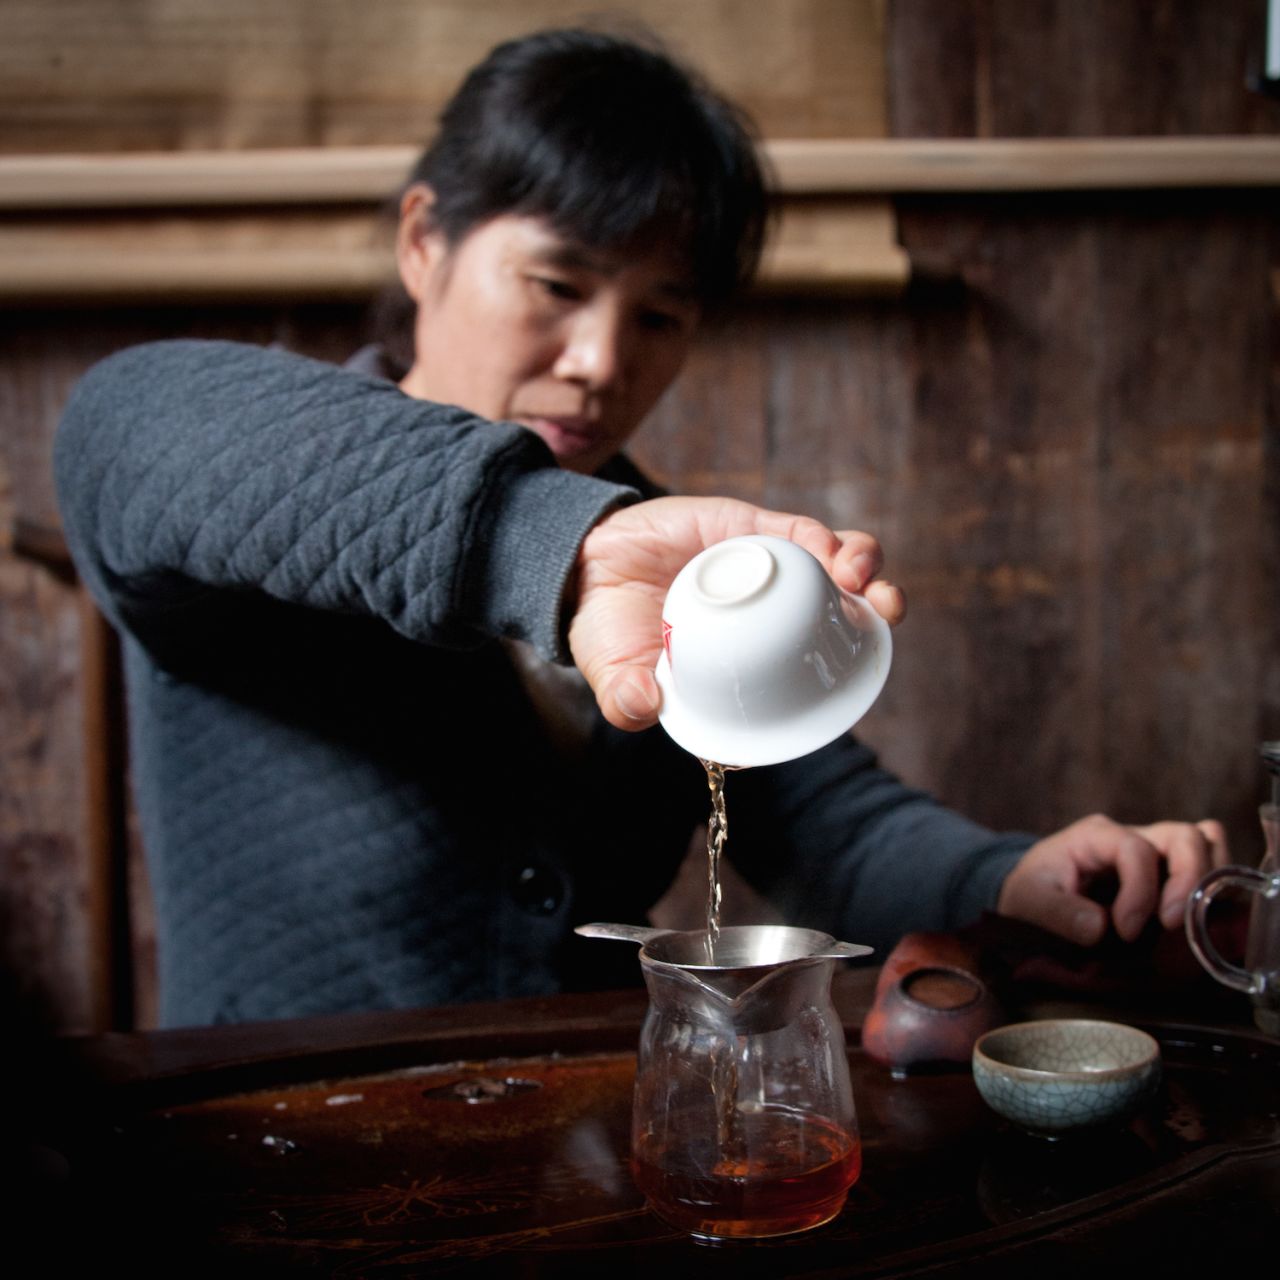 Oolong tea, a fragrant partially oxidized tea midway between green teas such as longjing and black teas such as pu'er, originates in southern China's Fujian Province. 